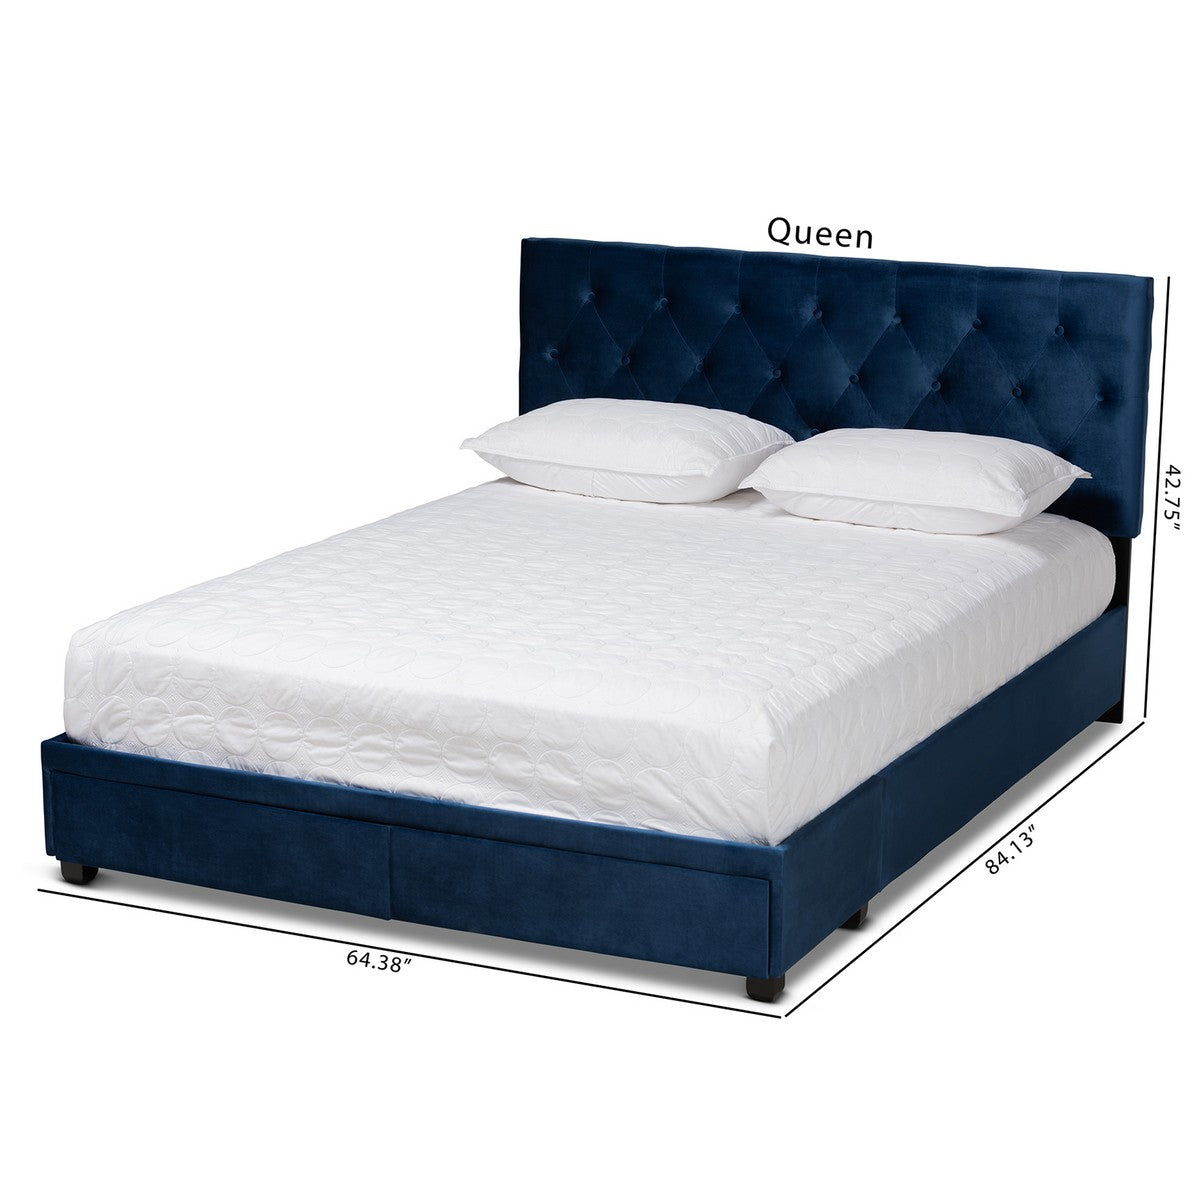 Baxton Studio Caronia Modern and Contemporary Navy Blue Velvet Fabric Upholstered 2-Drawer Queen Size Platform Storage Bed